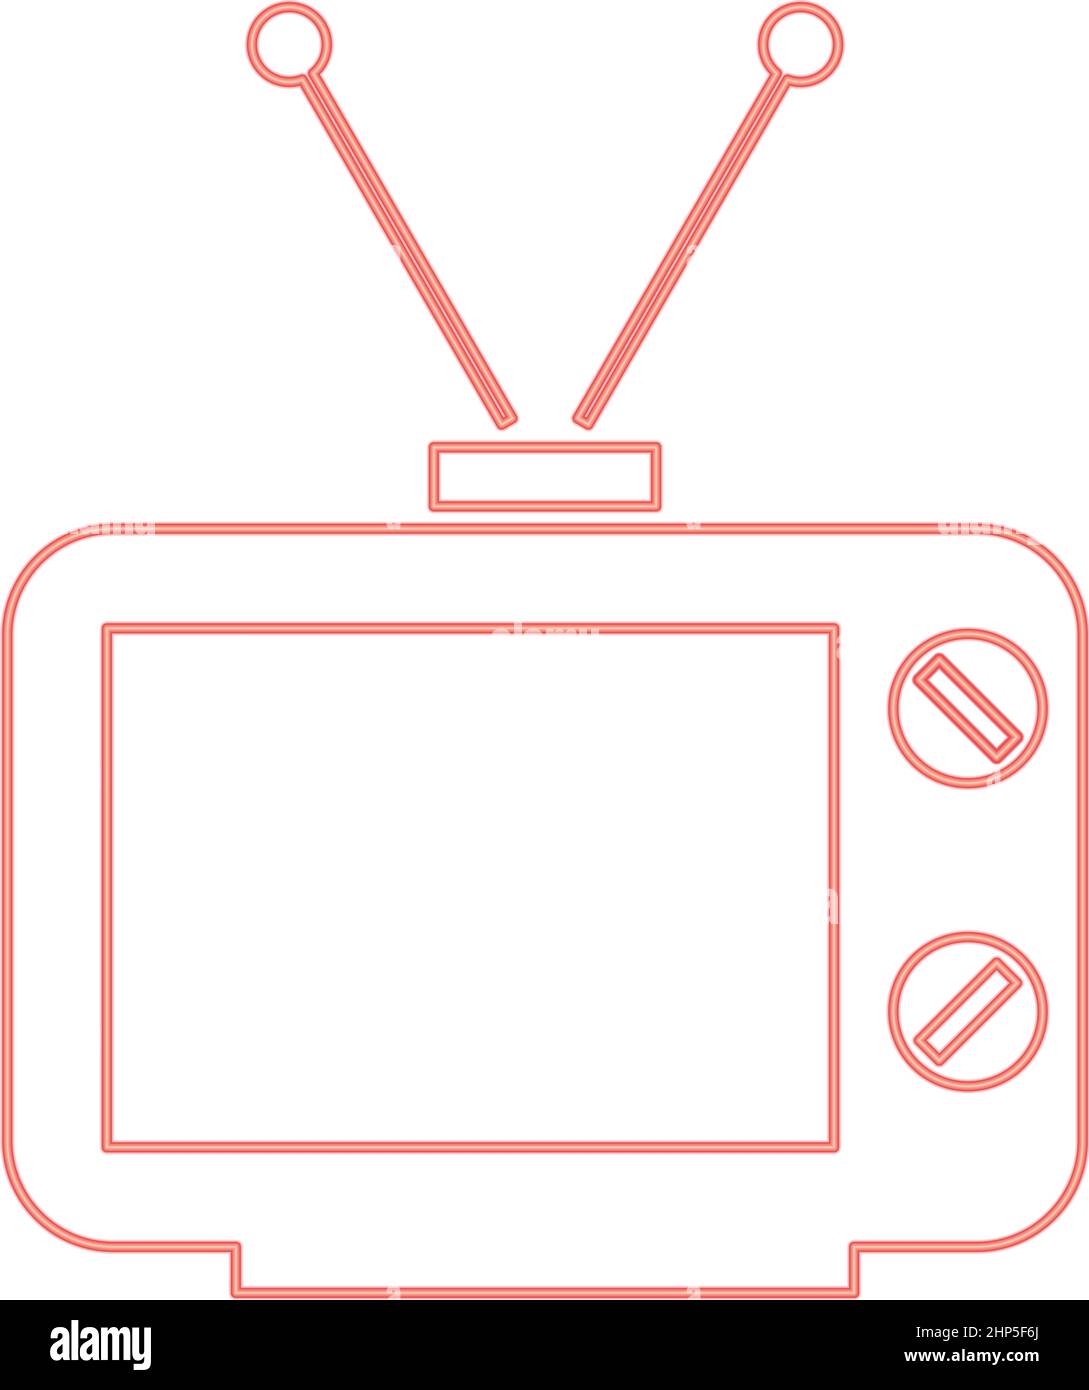 Neon old tv red color vector illustration flat style image Stock Vector